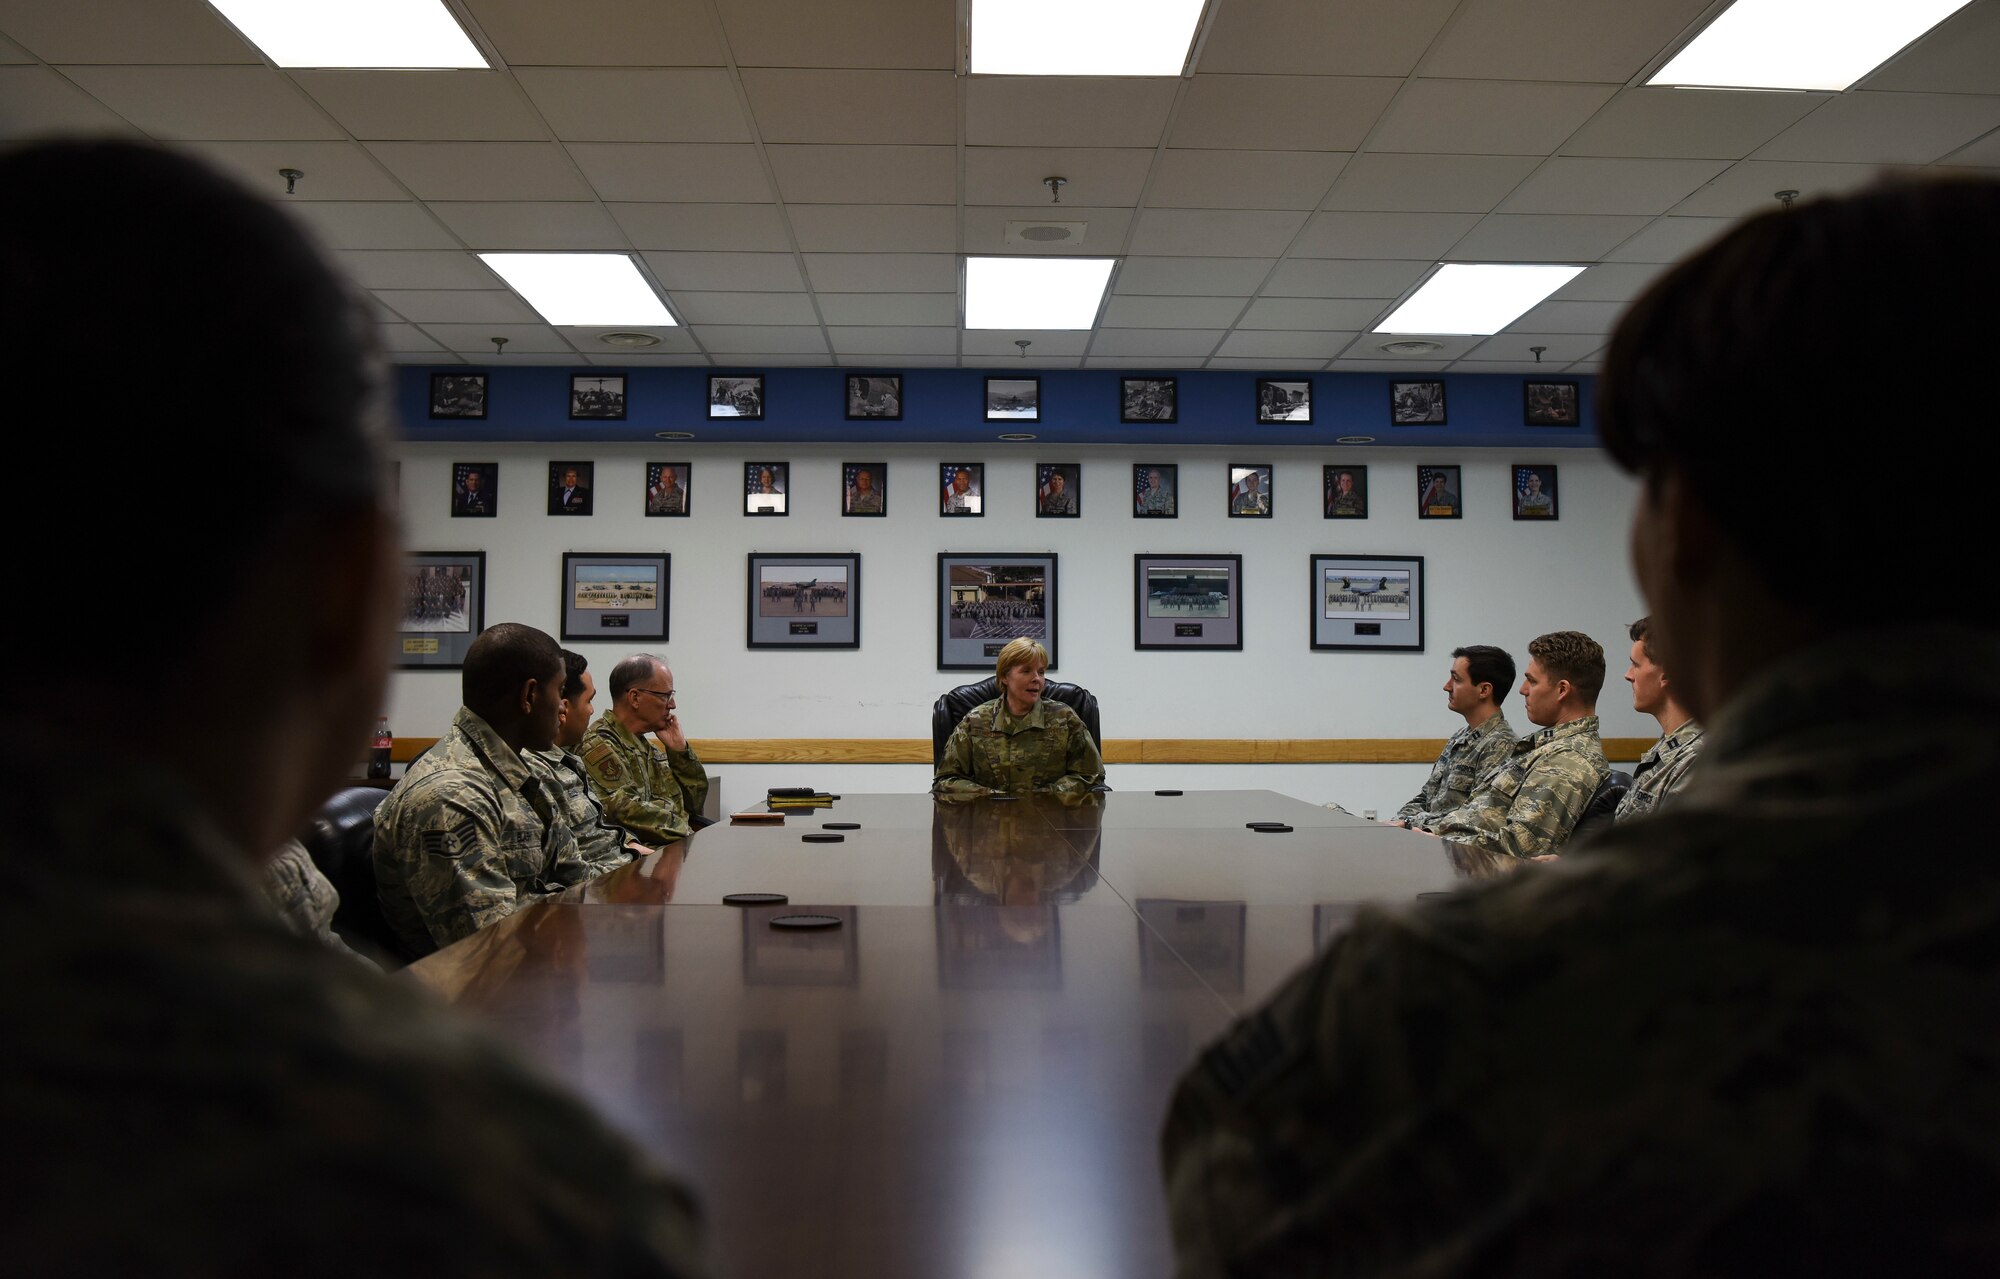 U.S. Air Force Brig. Gen. (Dr.) Sharon Bannister, Defense Health Agency education and training deputy assistant director and Assistant Surgeon General for Dental Services, speaks to Airmen from the 8th Medical Group Dental Clinic during her visit to Kunsan Air Base, Republic of Korea, Jan. 23, 2019. Gen. Bannister toured the 8th MDG sharing her priorities and learning how the Wolf Pack ensures force readiness. (U.S. Air Force Photo by Senior Airman Savannah Waters)